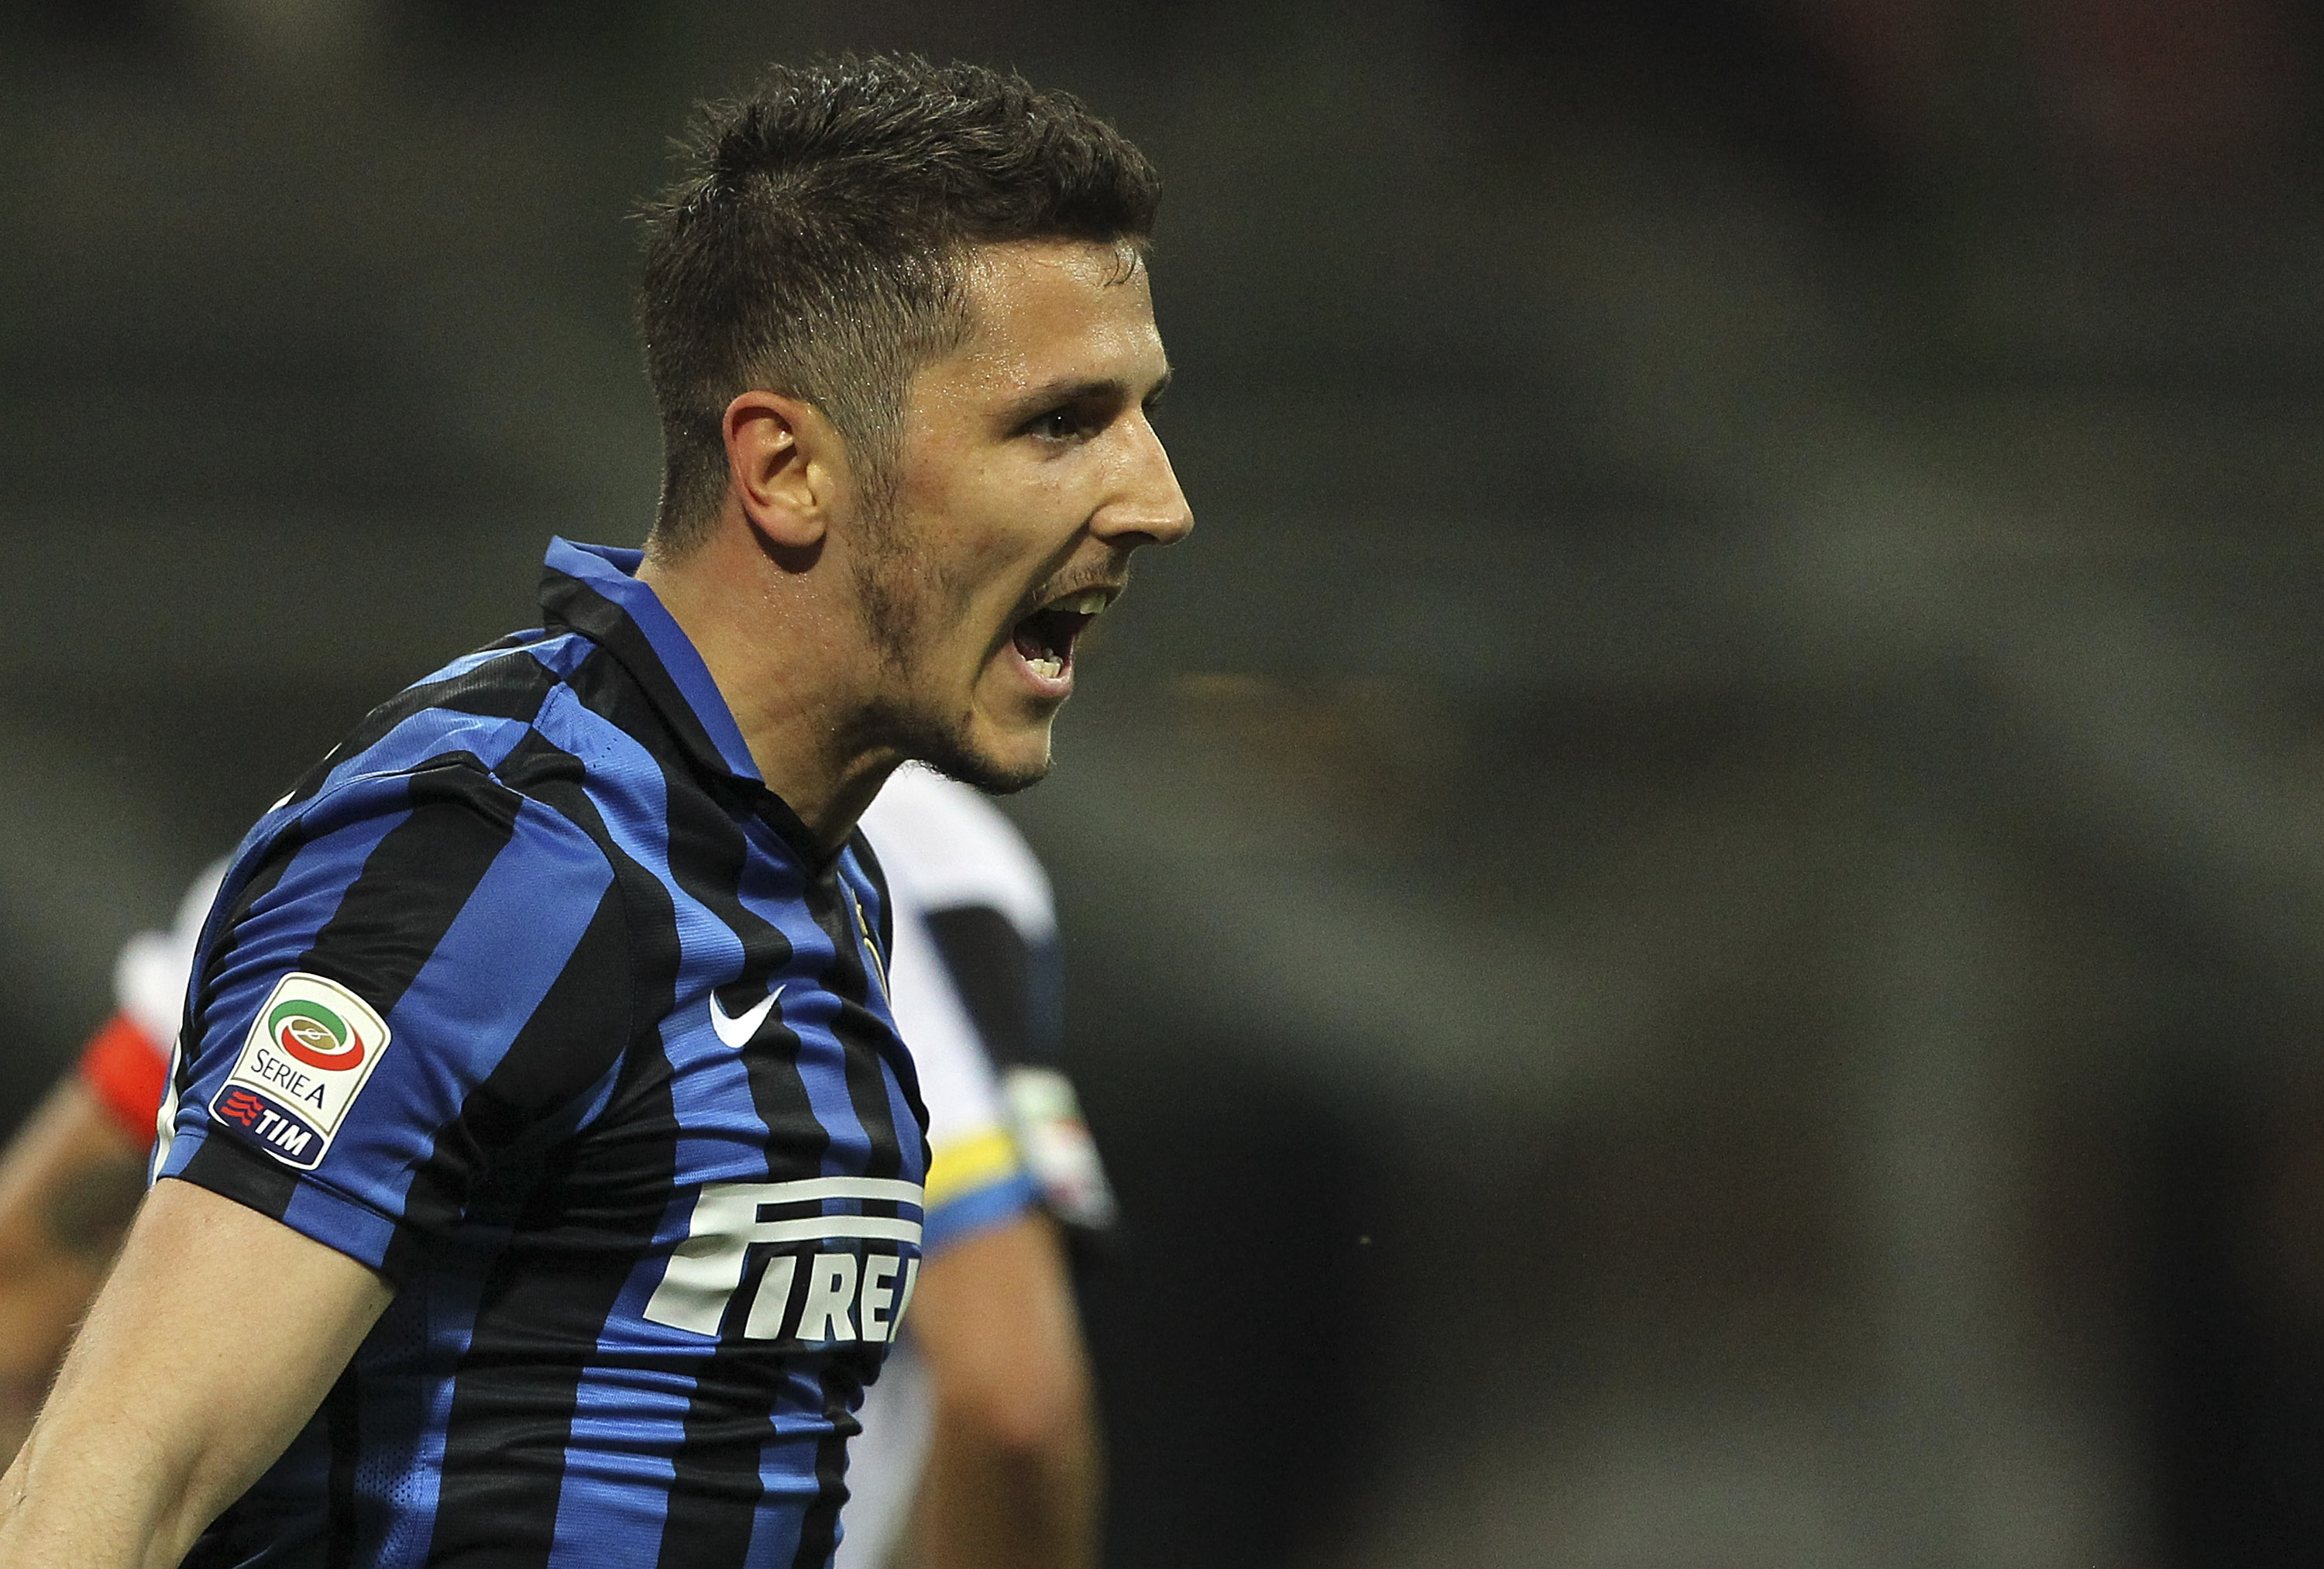 CdS – Jovetic not in Spalletti’s plans